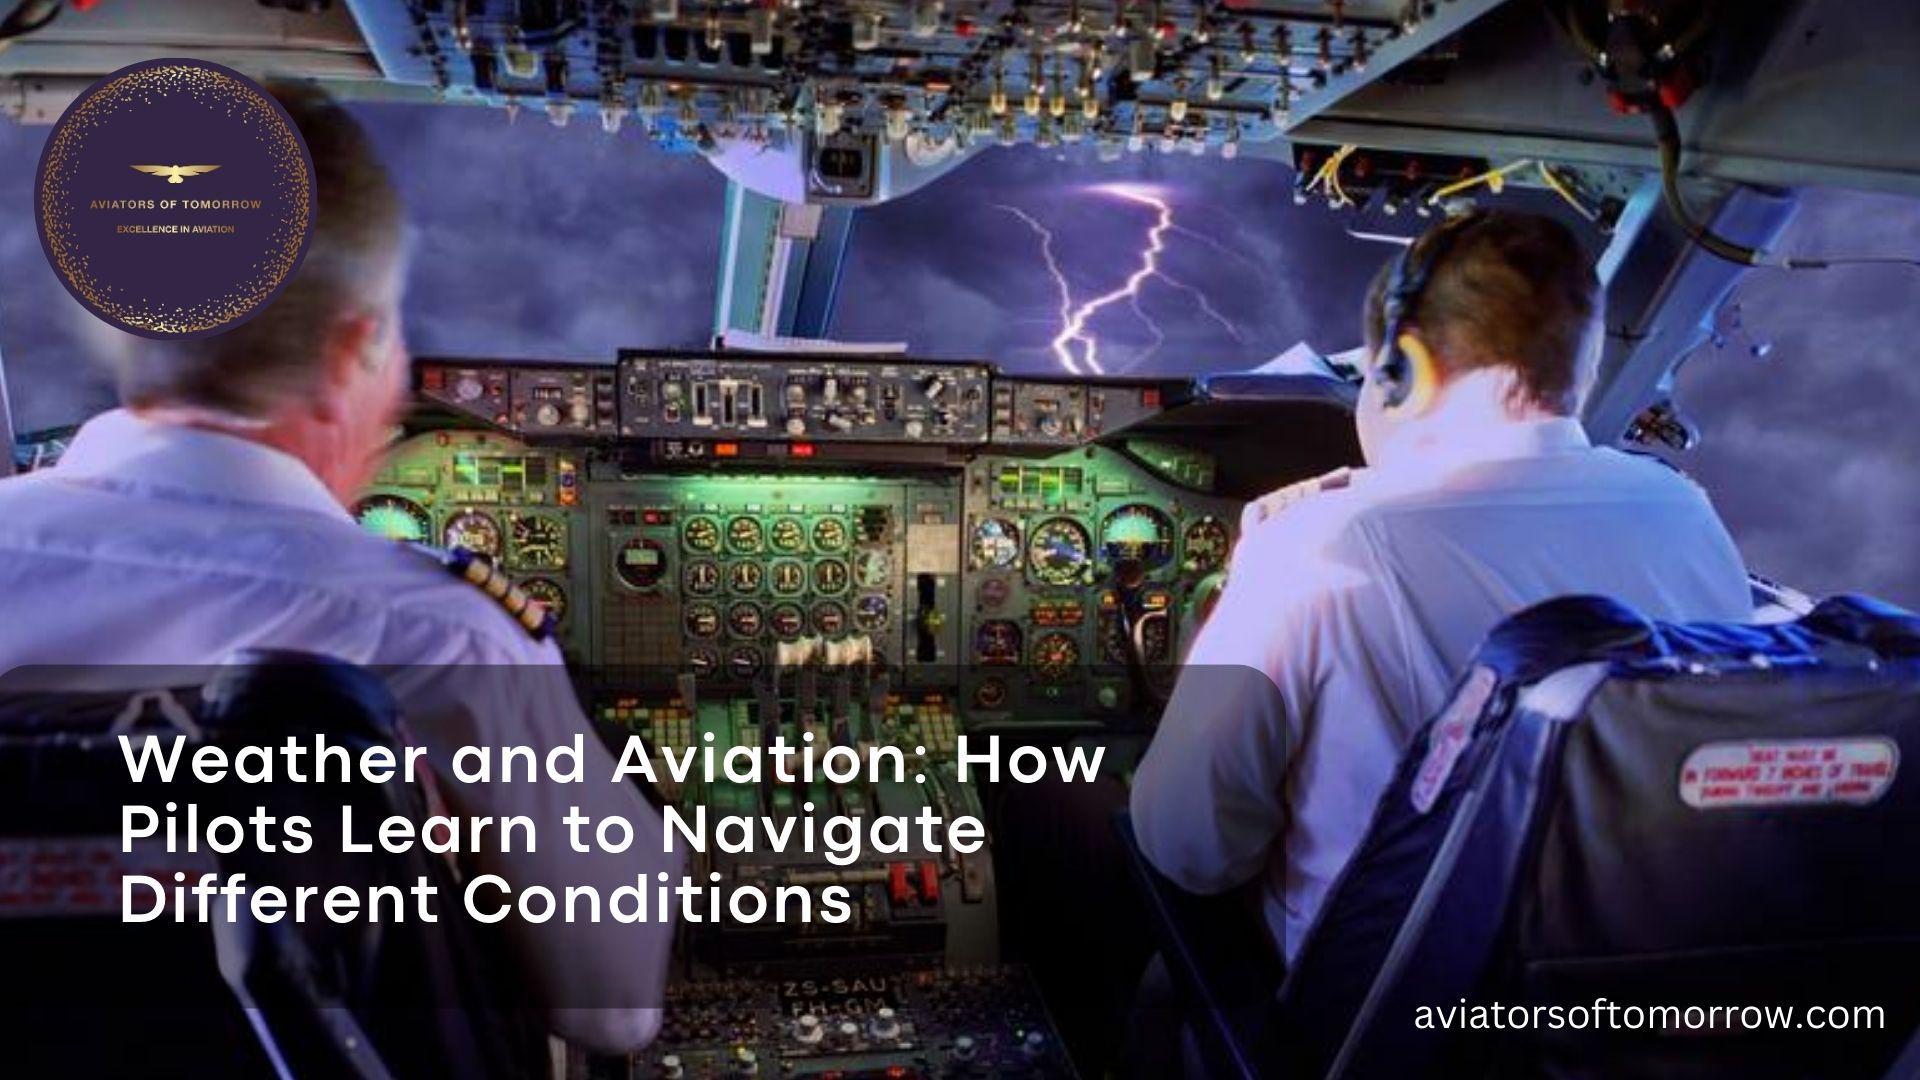 Weather and Aviation: How Pilots Learn to Navigate Different Conditions